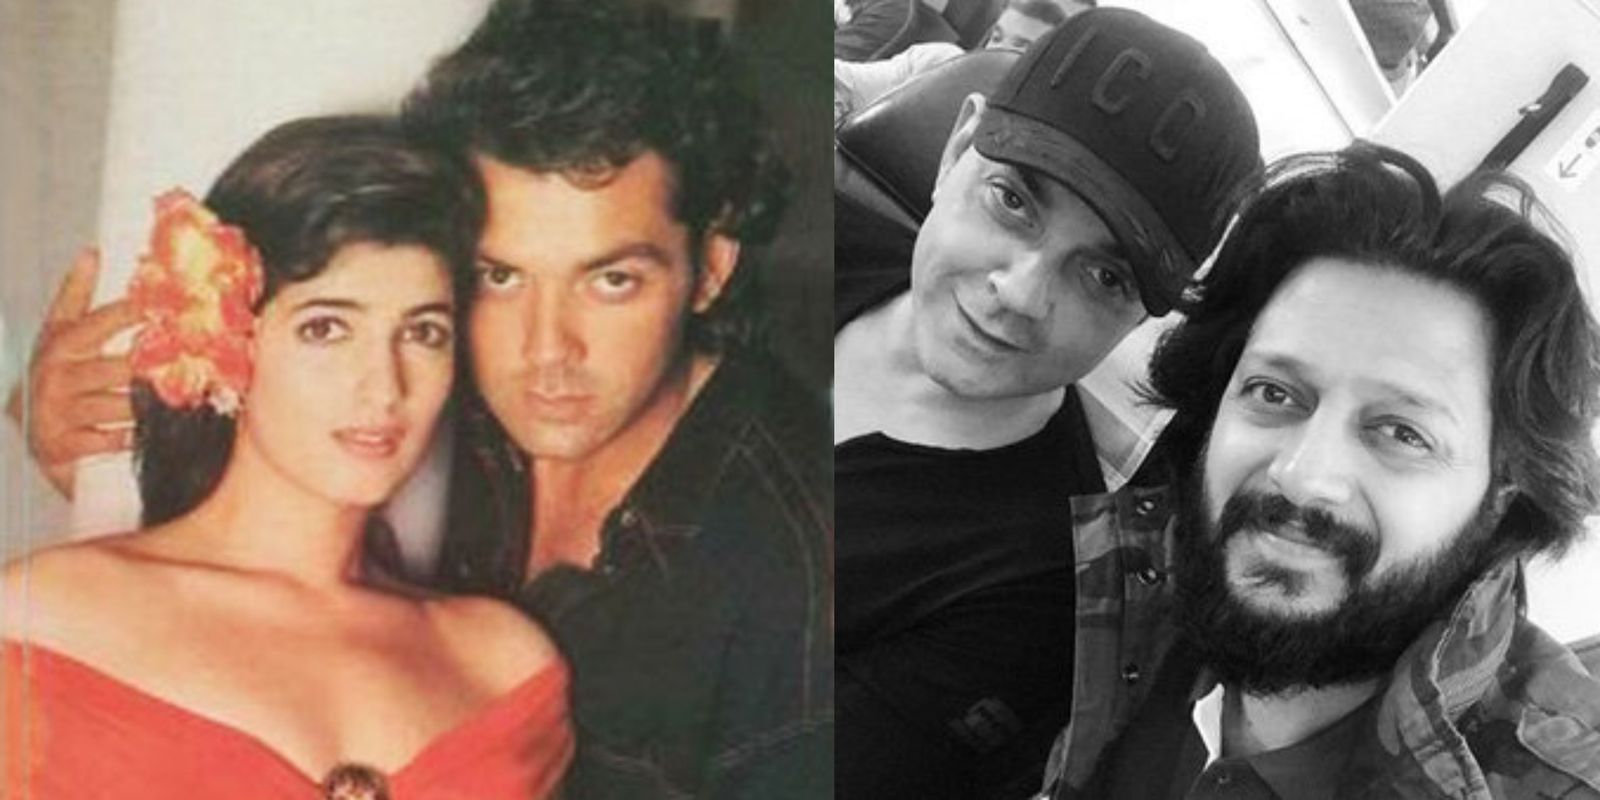 Bobby Deol Celebrates 25 Years In Bollywood, Twinkle Khanna And Riteish Deshmukh Send Their Love With Heartfelt Messages